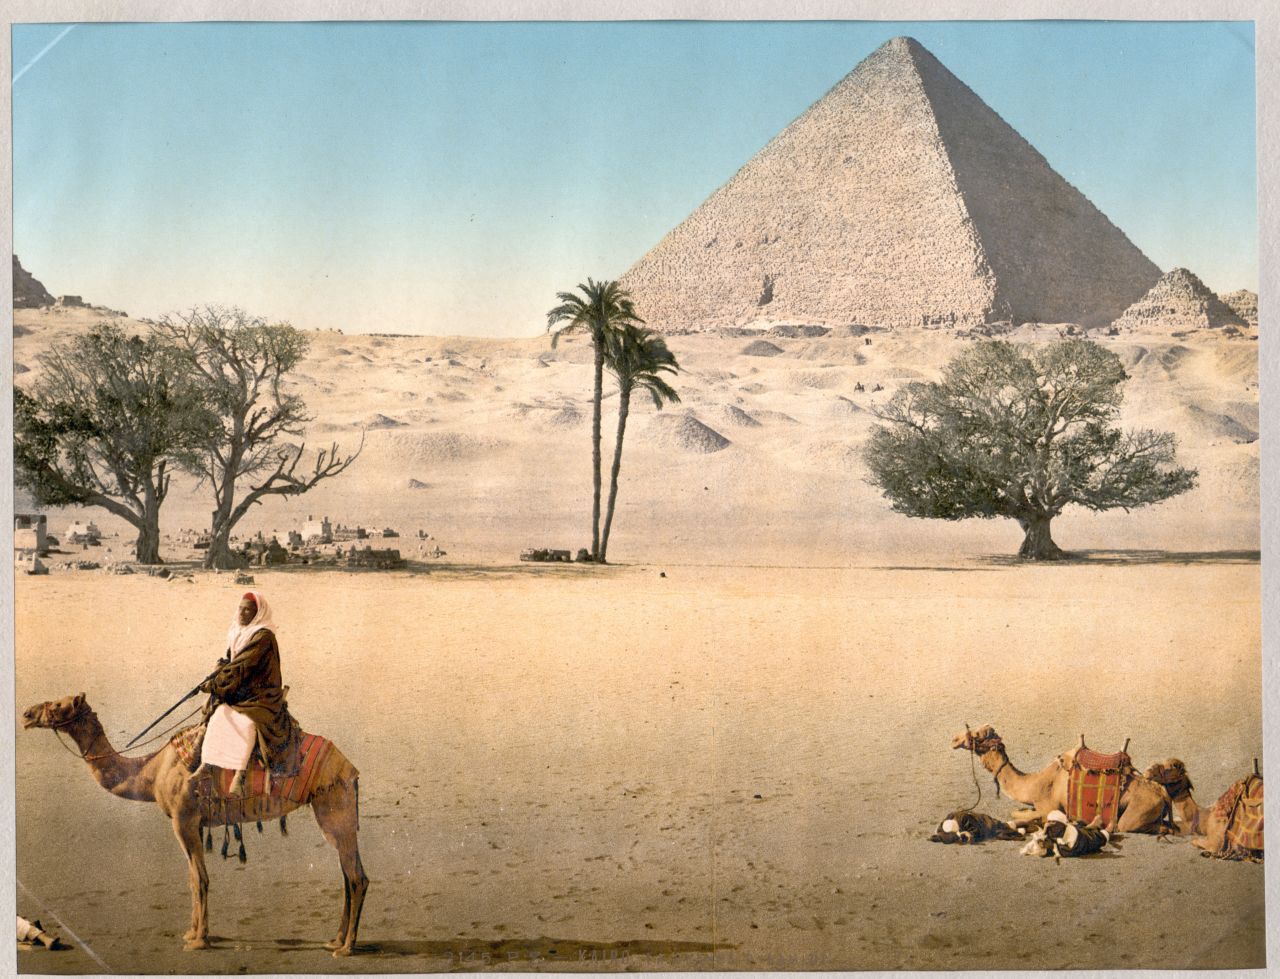 Resting Bedouins at the Grand Pyramid, Cairo, Egypt. Helena Zinkham of the Library of Congress, where these rare photochroms are kept, says the main market for these high quality images was European tourists.